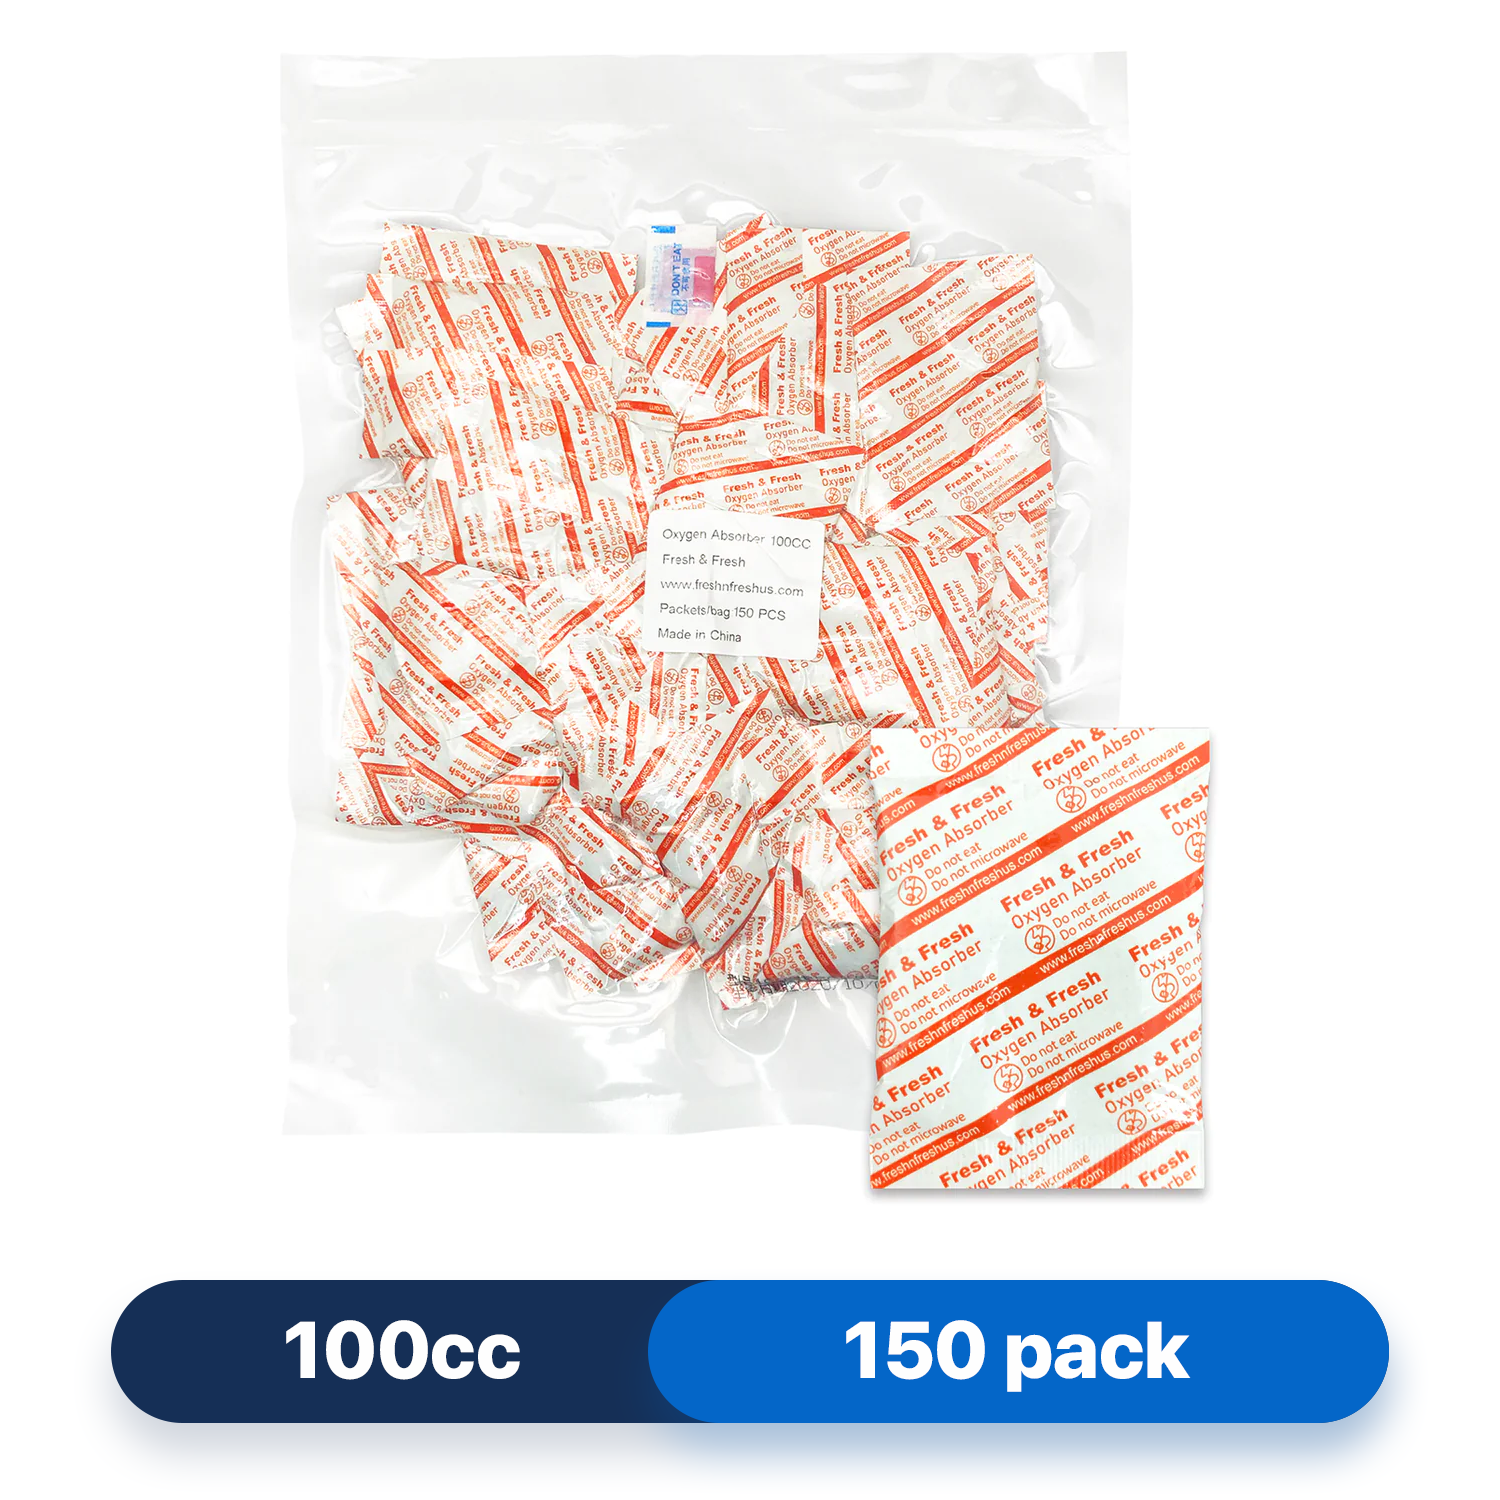 Fresh & Fresh (150 Packs) 100 CC Premium Oxygen Absorbers(1 Bag of 150 packets) - ISO 9001 Certified Facility Manufactured